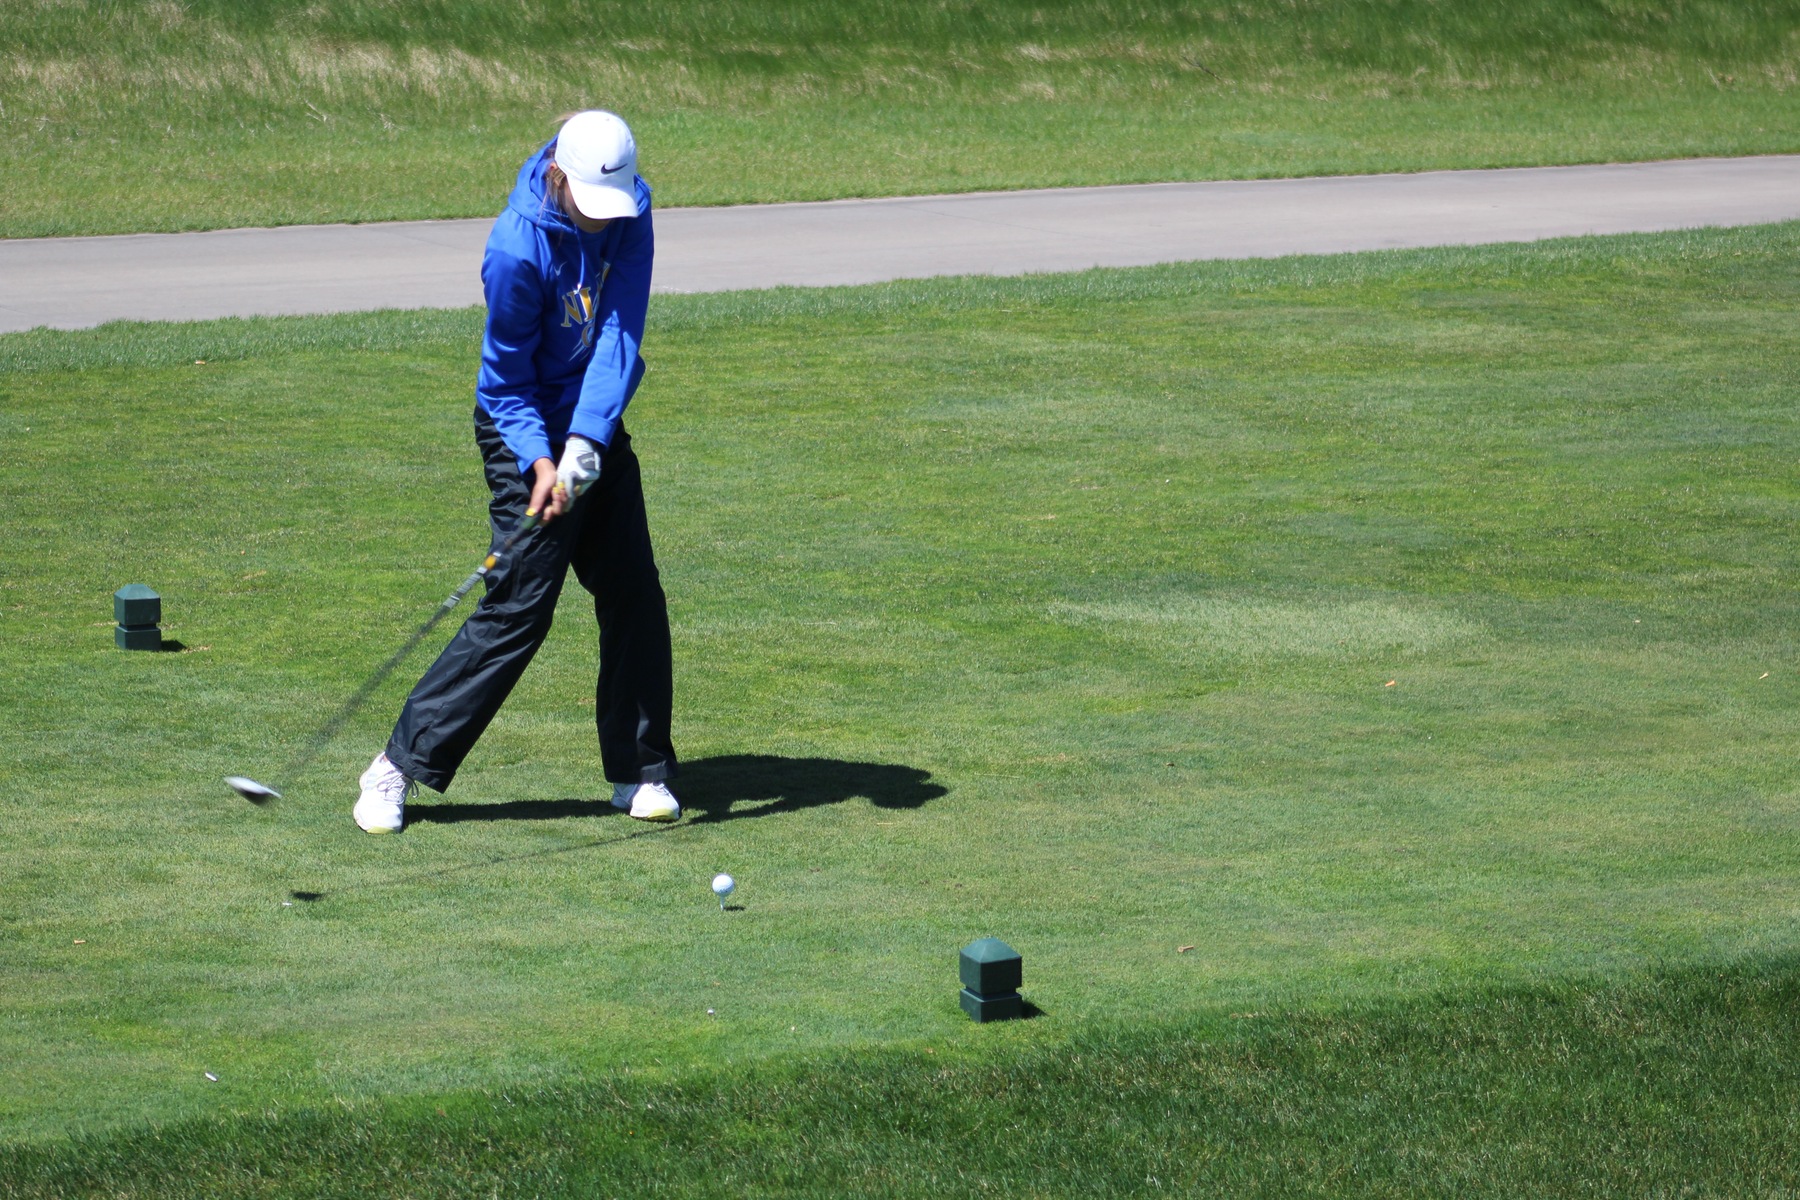 NIACC freshman Jordyn Barragy tees off during Friday's round at the regional golf tournament Friday at Otter Creek Golf Course in Ankeny.